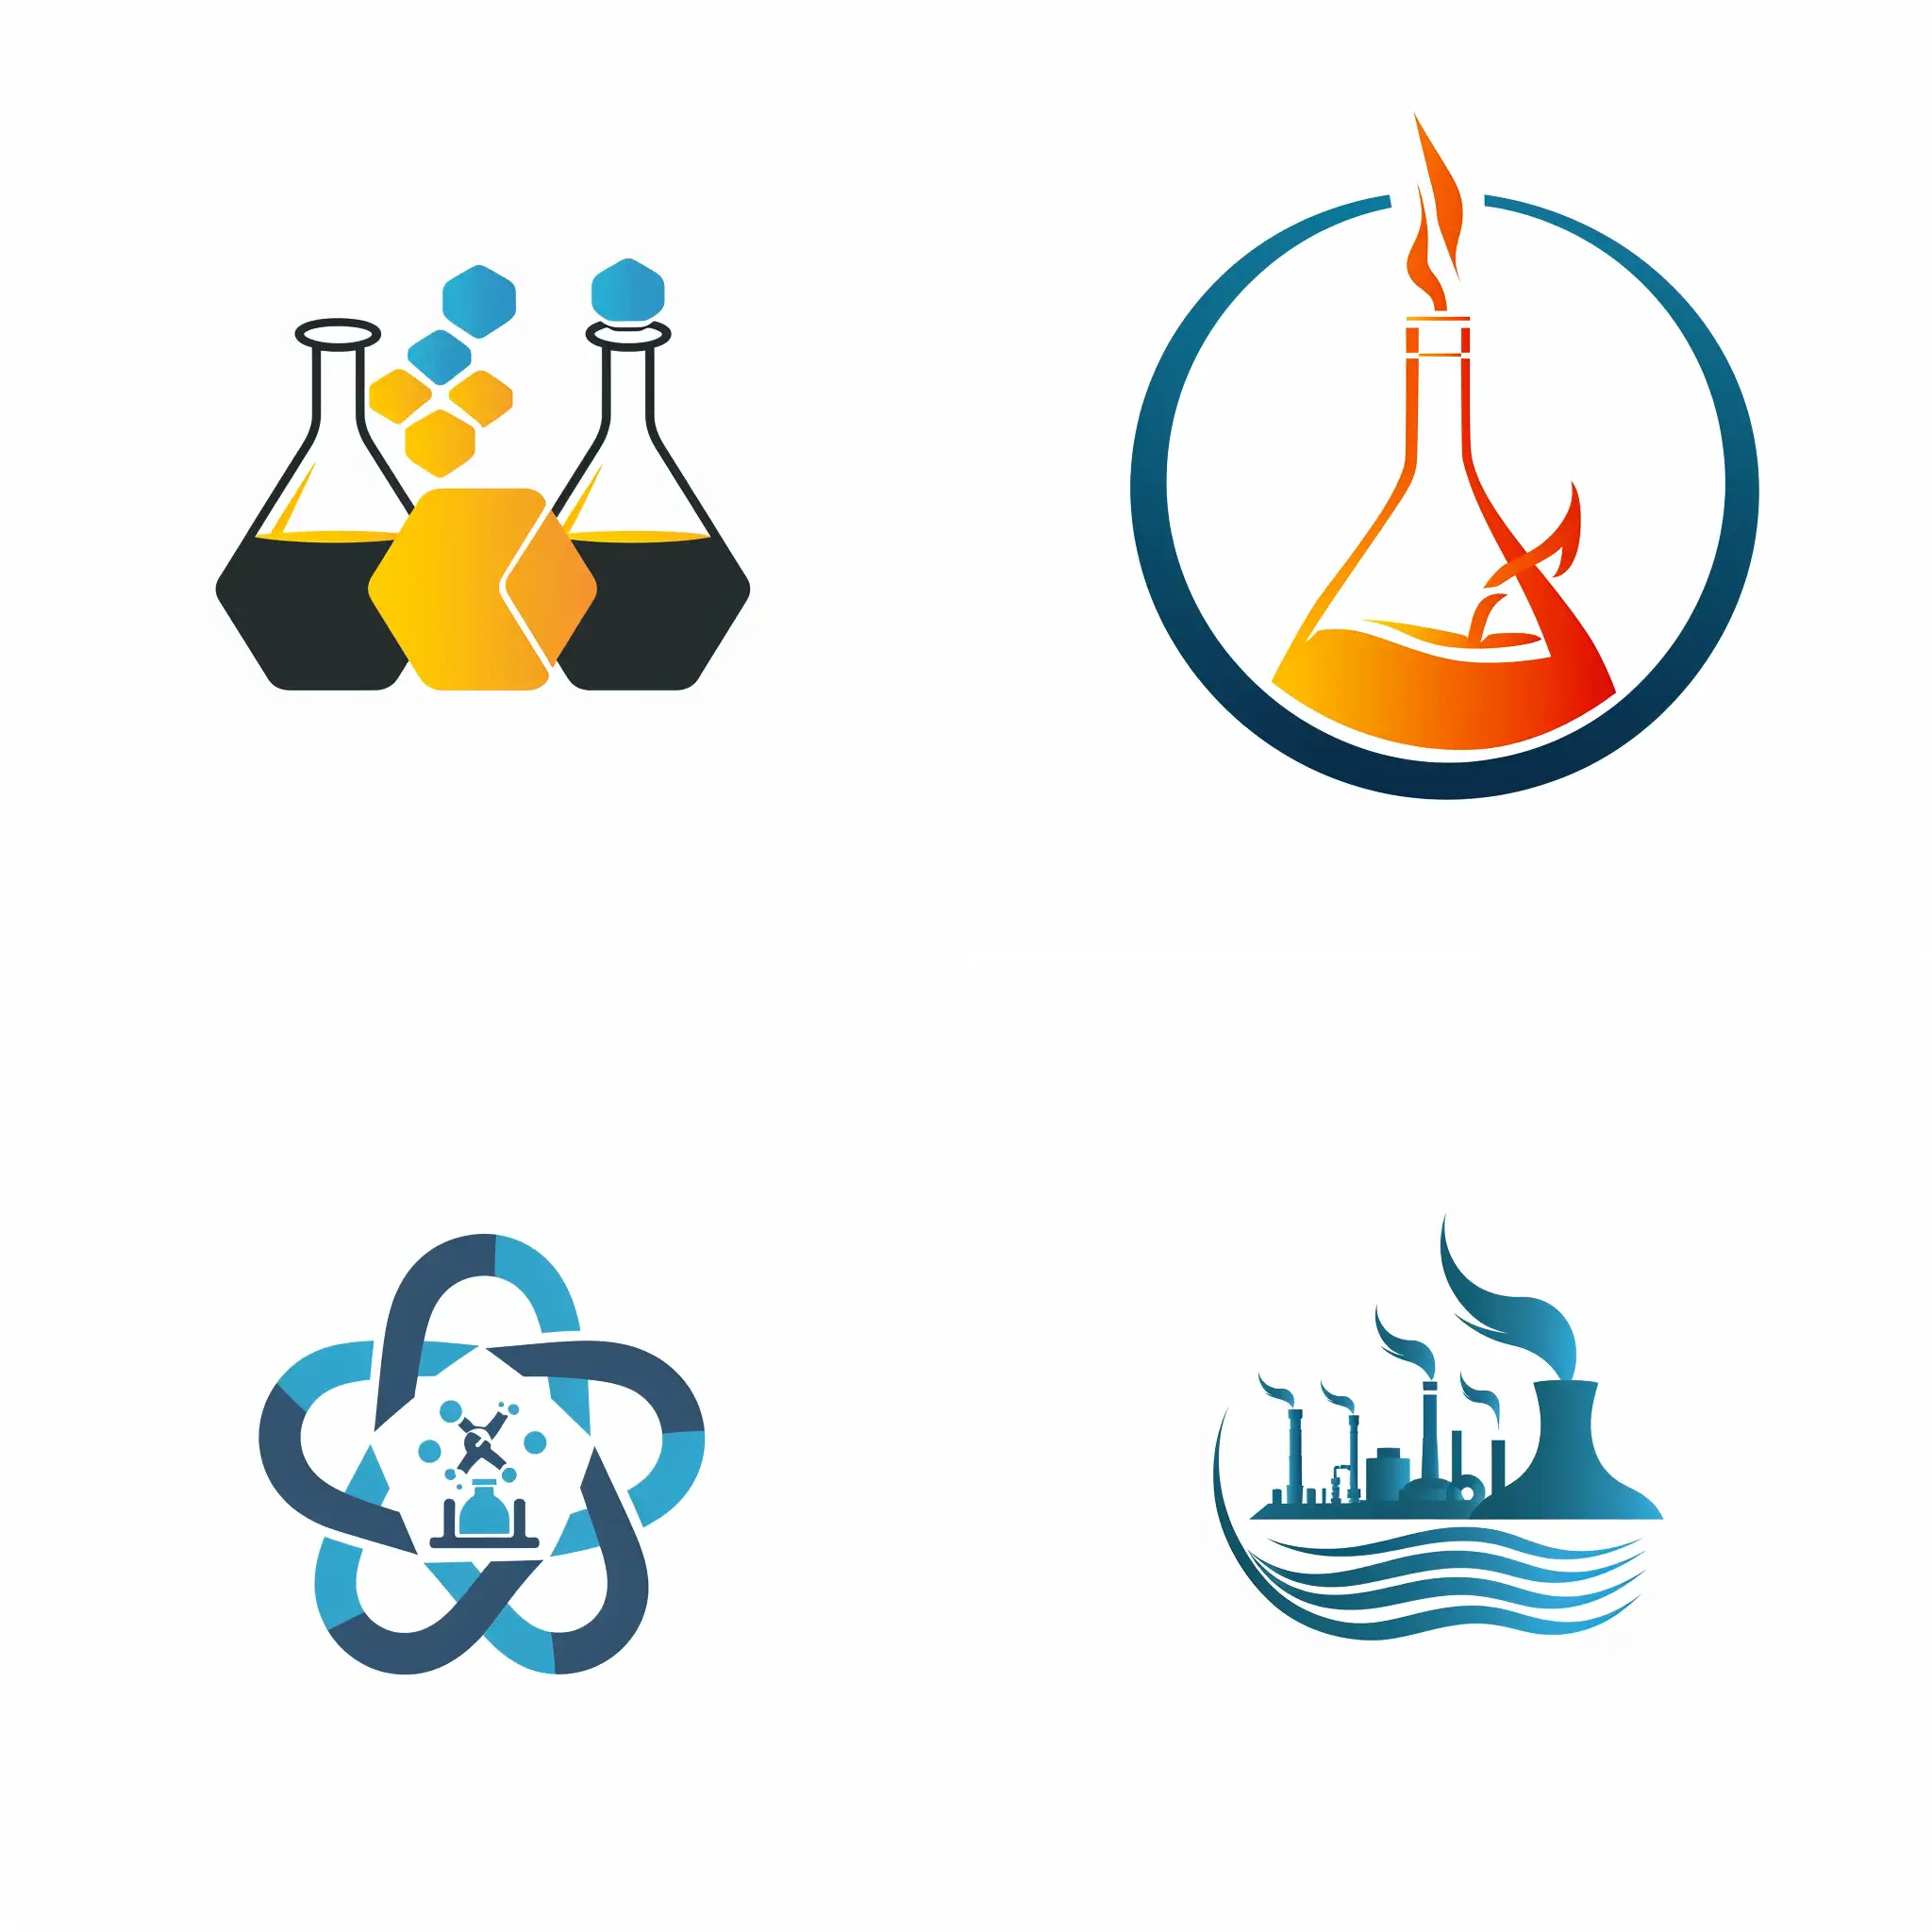 I want a logo for a company in the field of chemical engineering, fuel, catalyst, polymer, biotechnology, clean, petrochemical, power plant, refinery, etc.